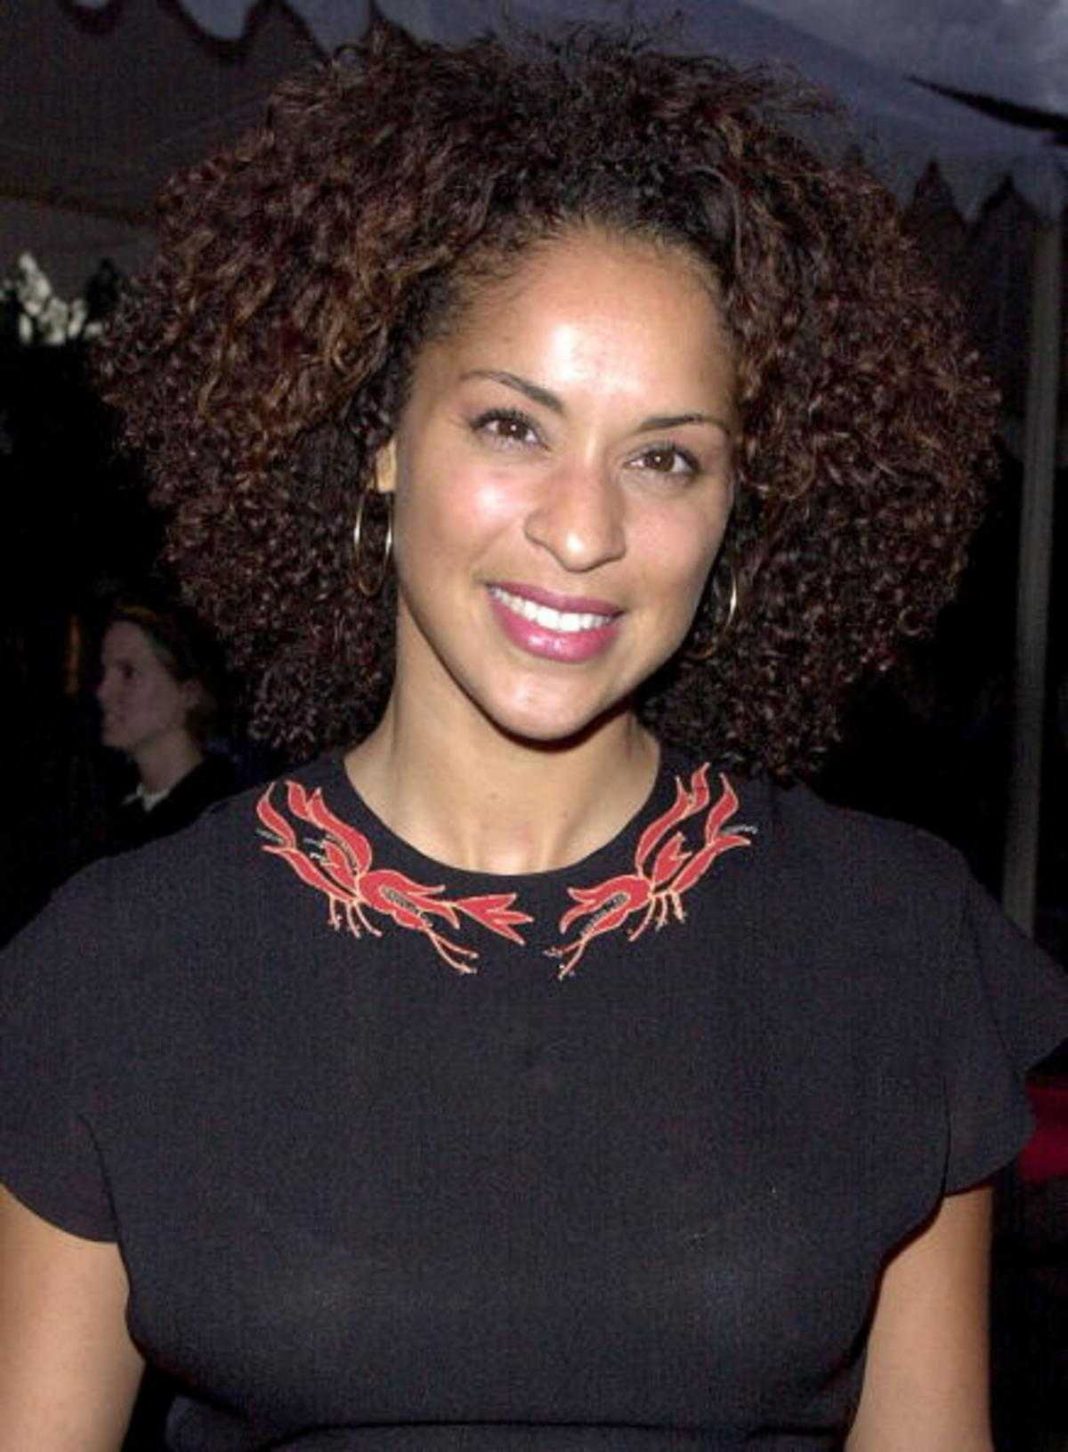 40 Karyn Parsons Nude Pictures Flaunt Her Diva Like Looks 16